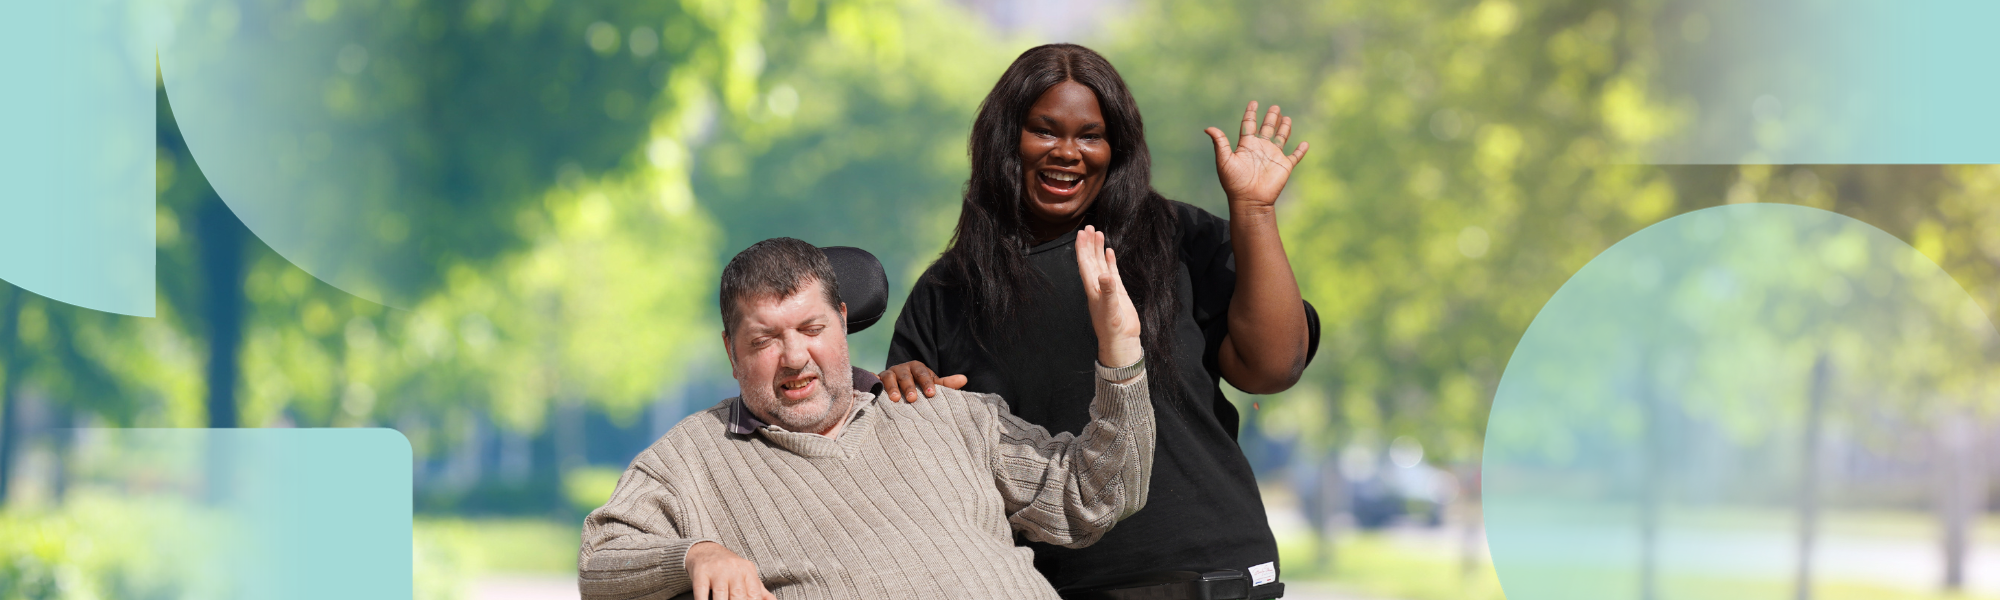 IMAGE: Client and their Disability Support Worker are smiling and waving, they are outdoors